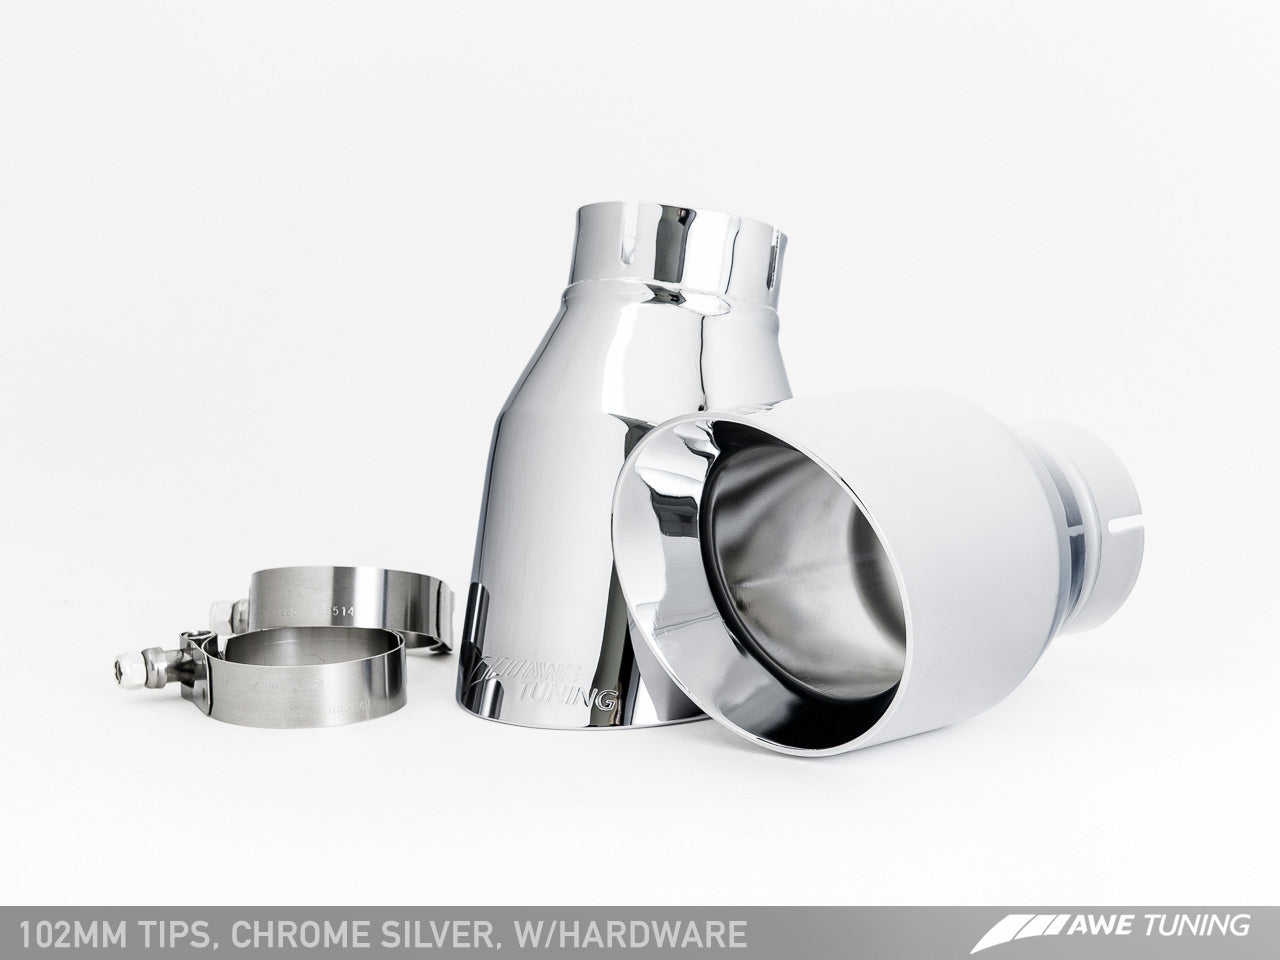 AWE Exhaust Suite for Audi C7 A6